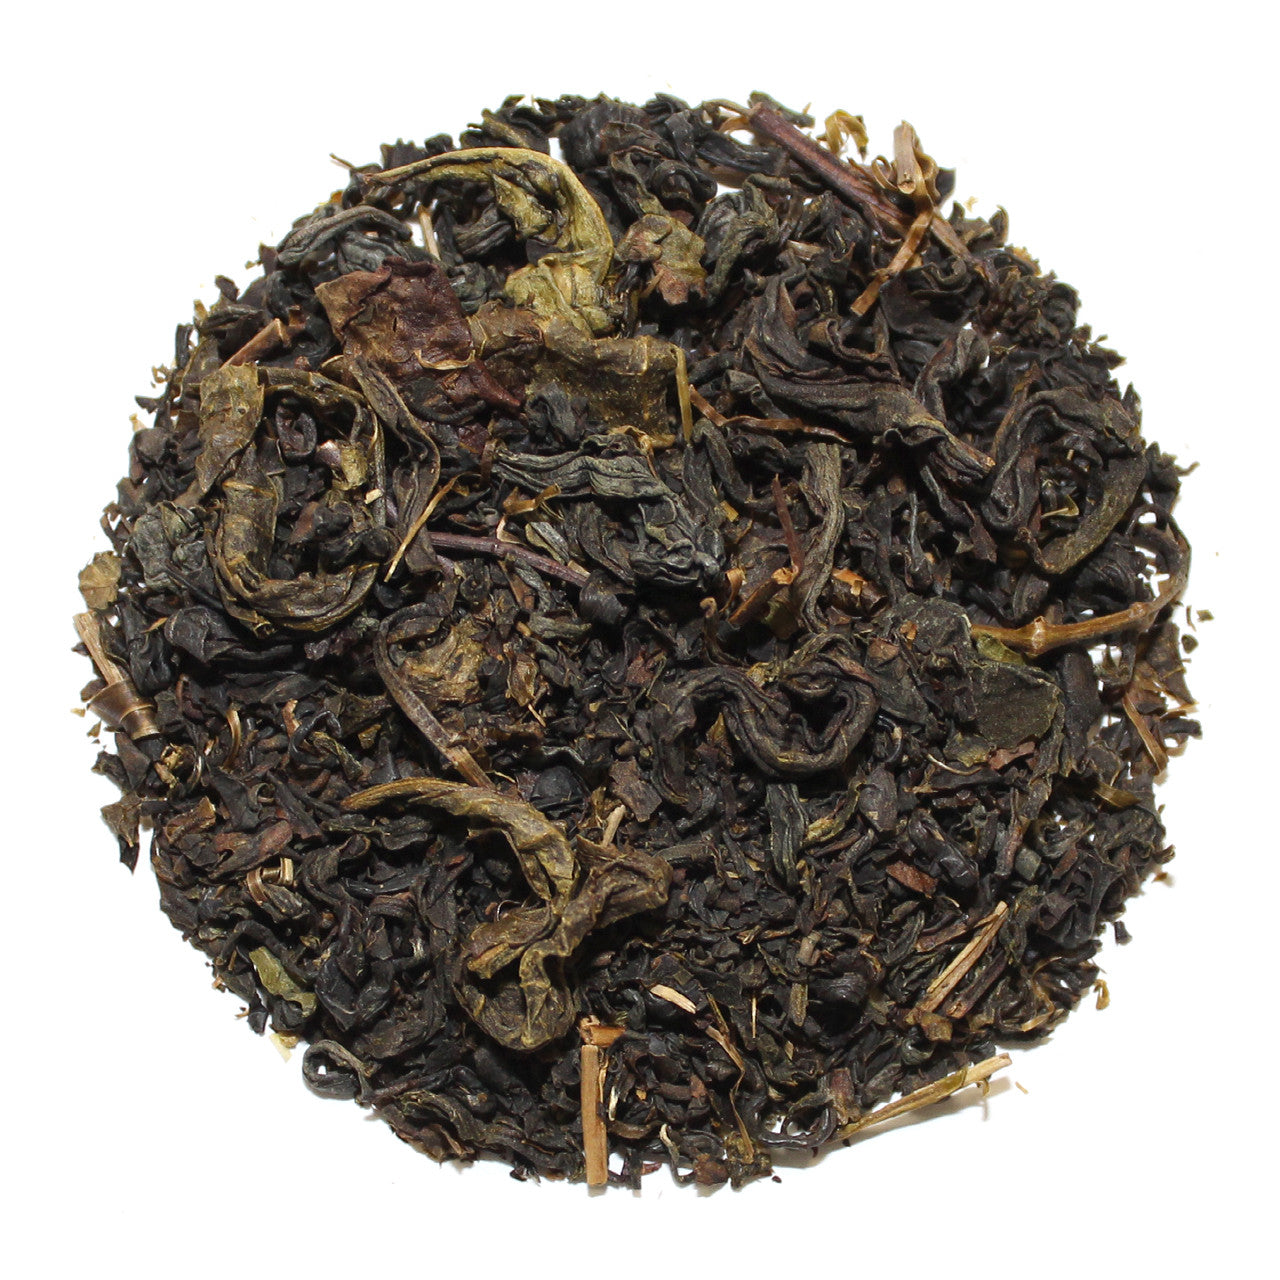 Japanese Oolong 0.5 LB LIMITED EDITION